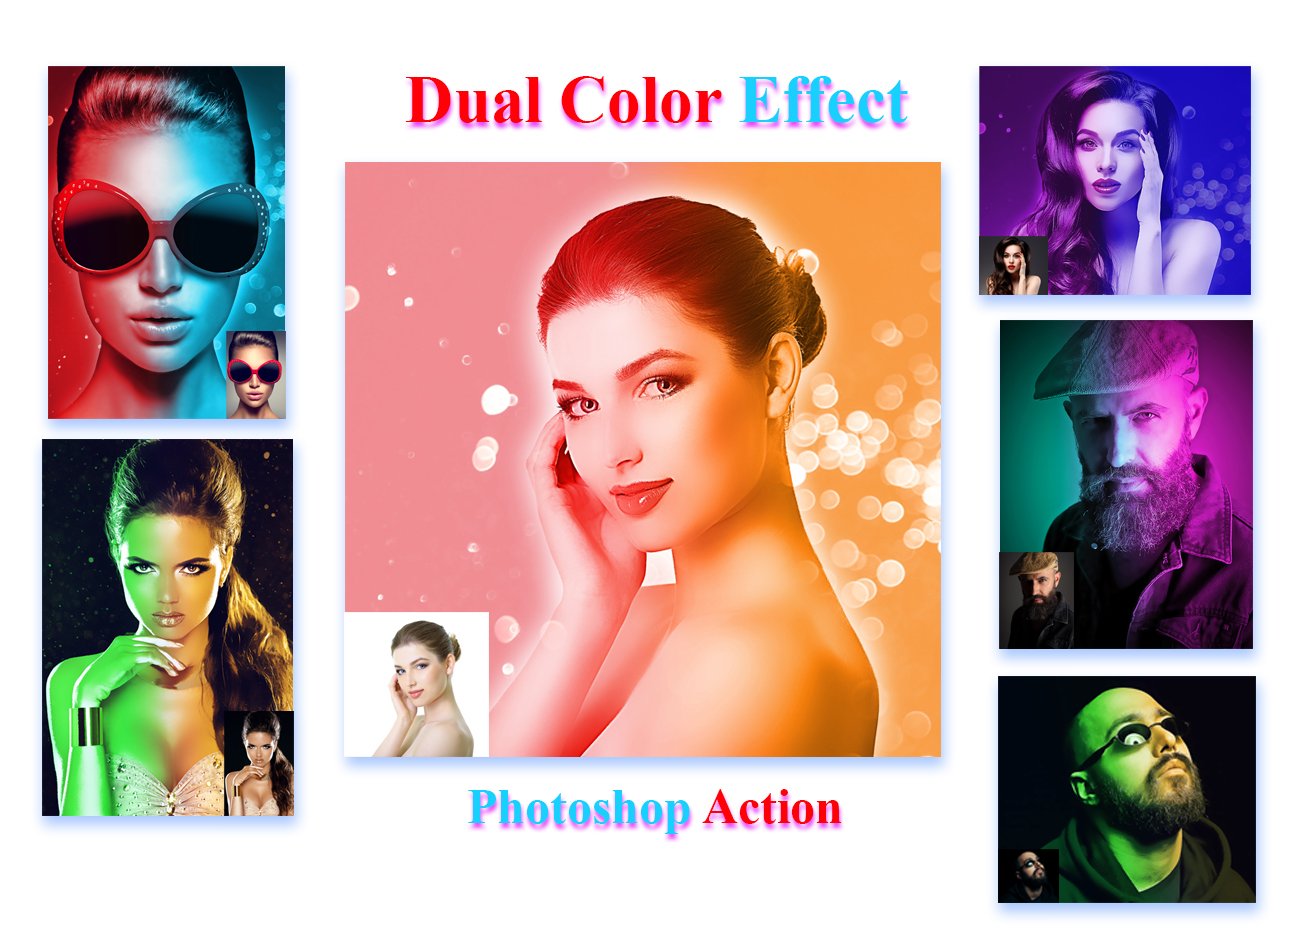 Dual Color Effect Photoshop Actioncover image.